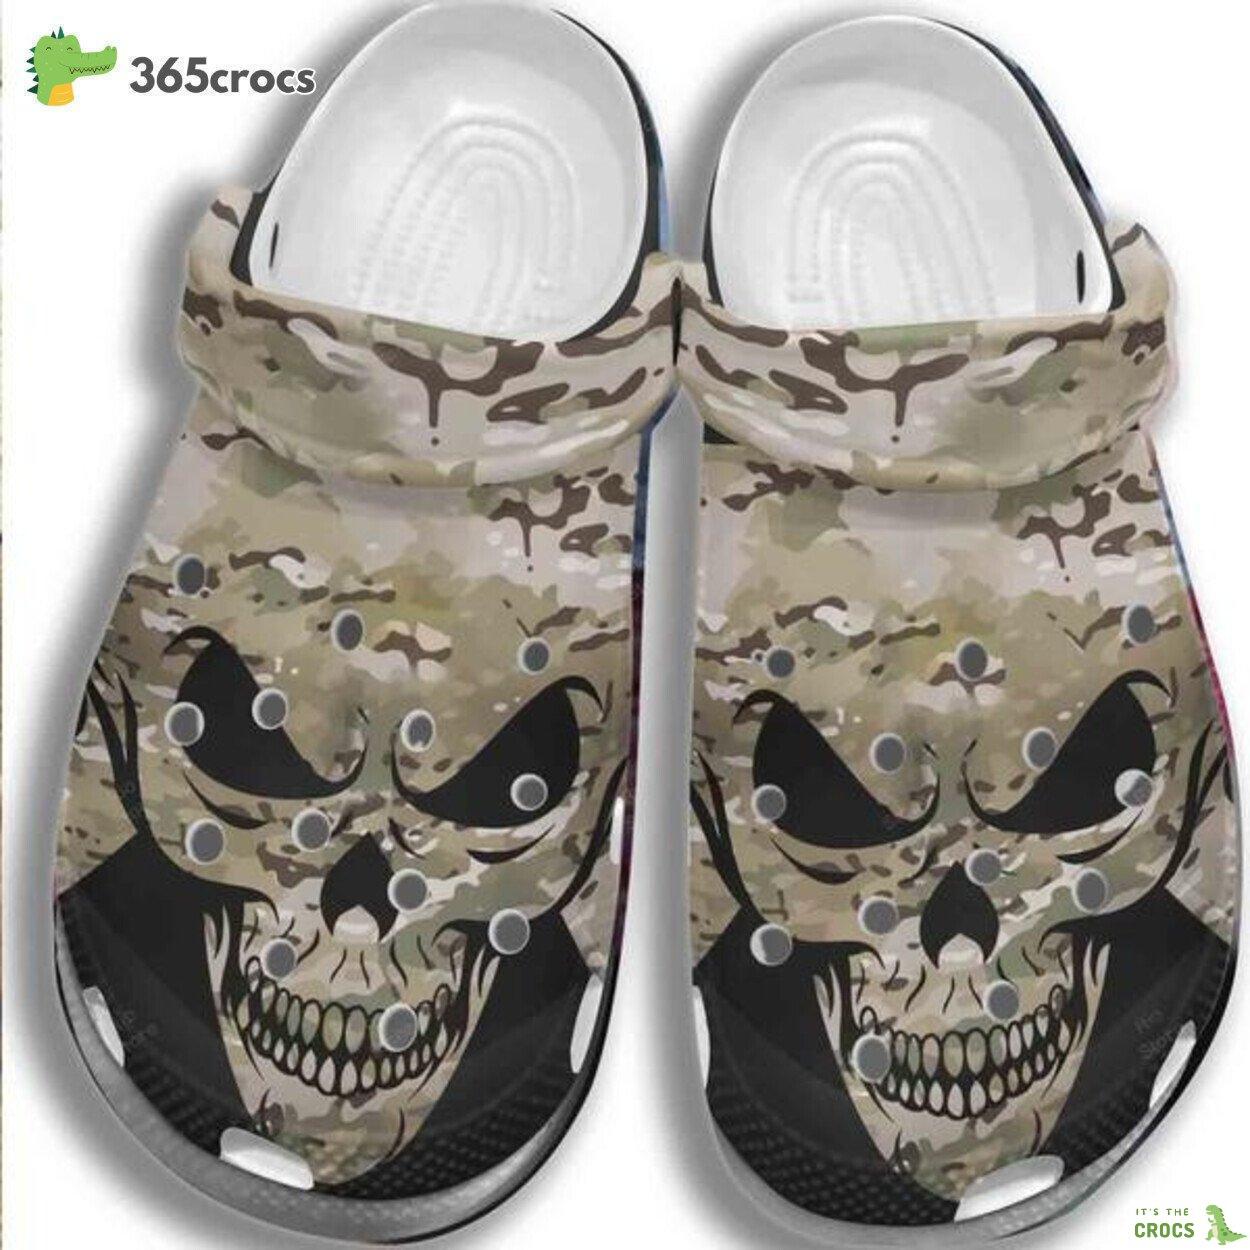 Army Skull clog Shoesshoes Crocbland Clog Gifts For Men Son Father Day